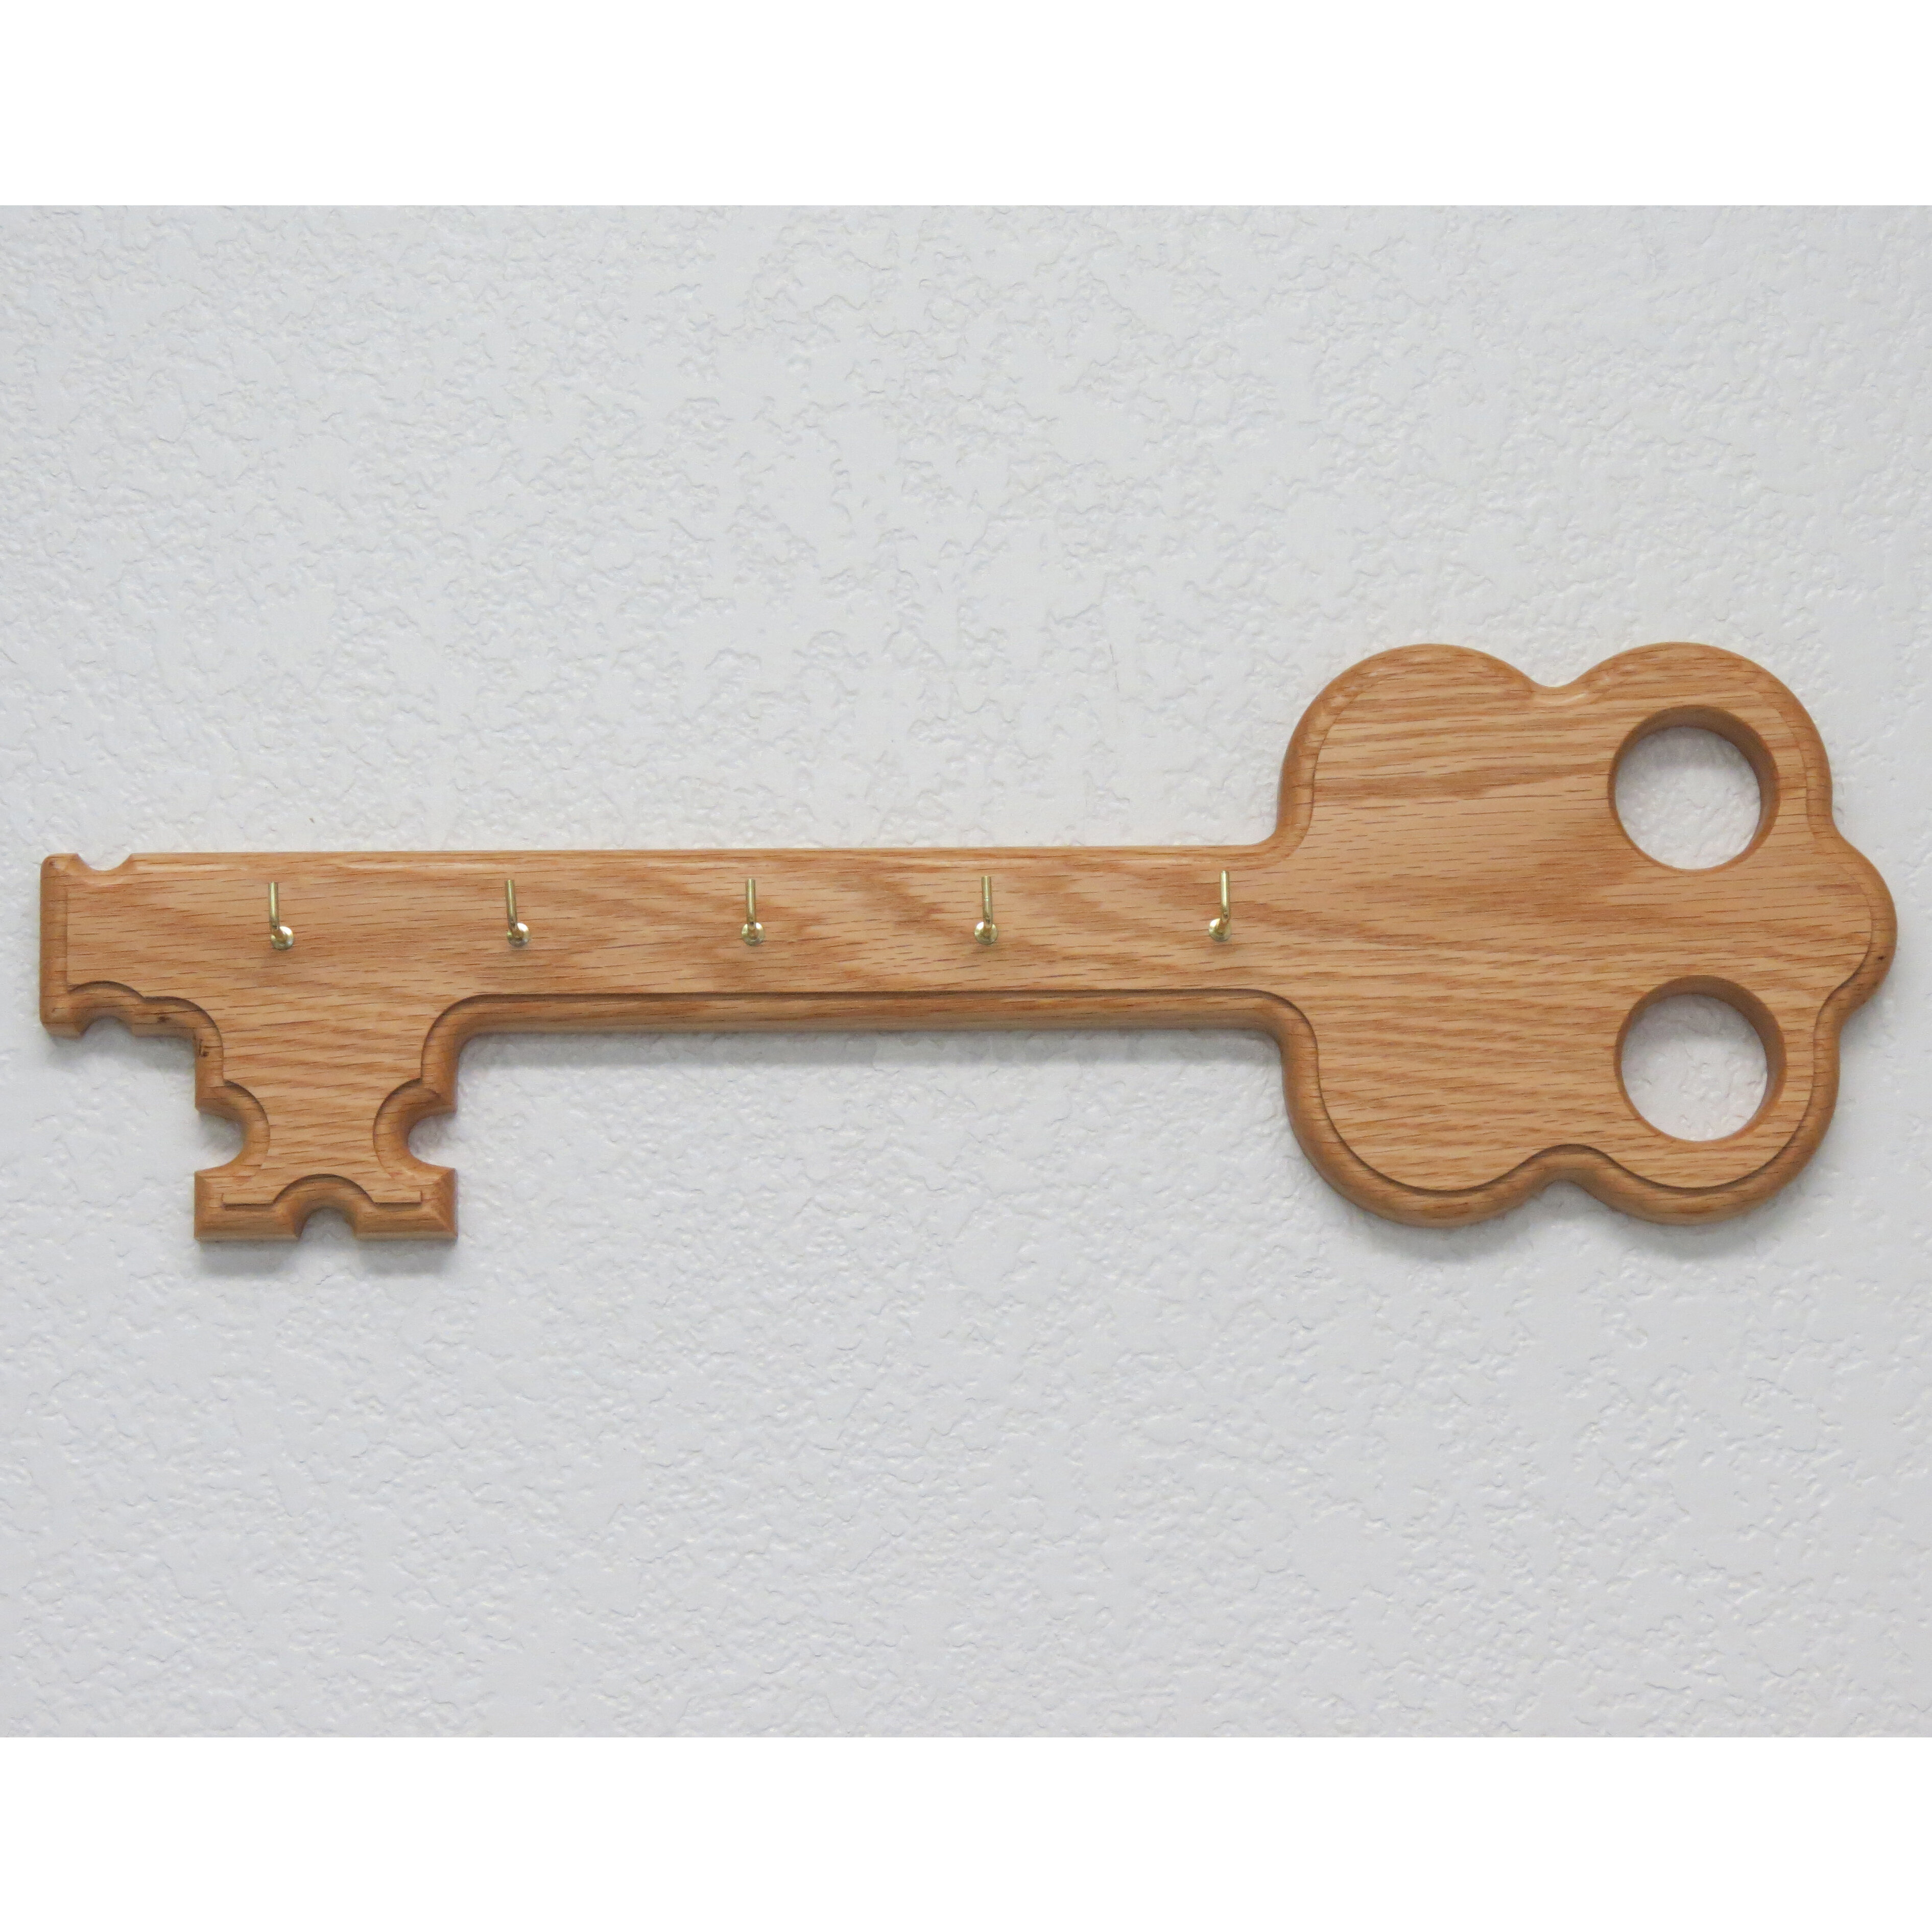 Key Rack Holder Personalized Carved Wall Mounted Key Holder Solid Wood 